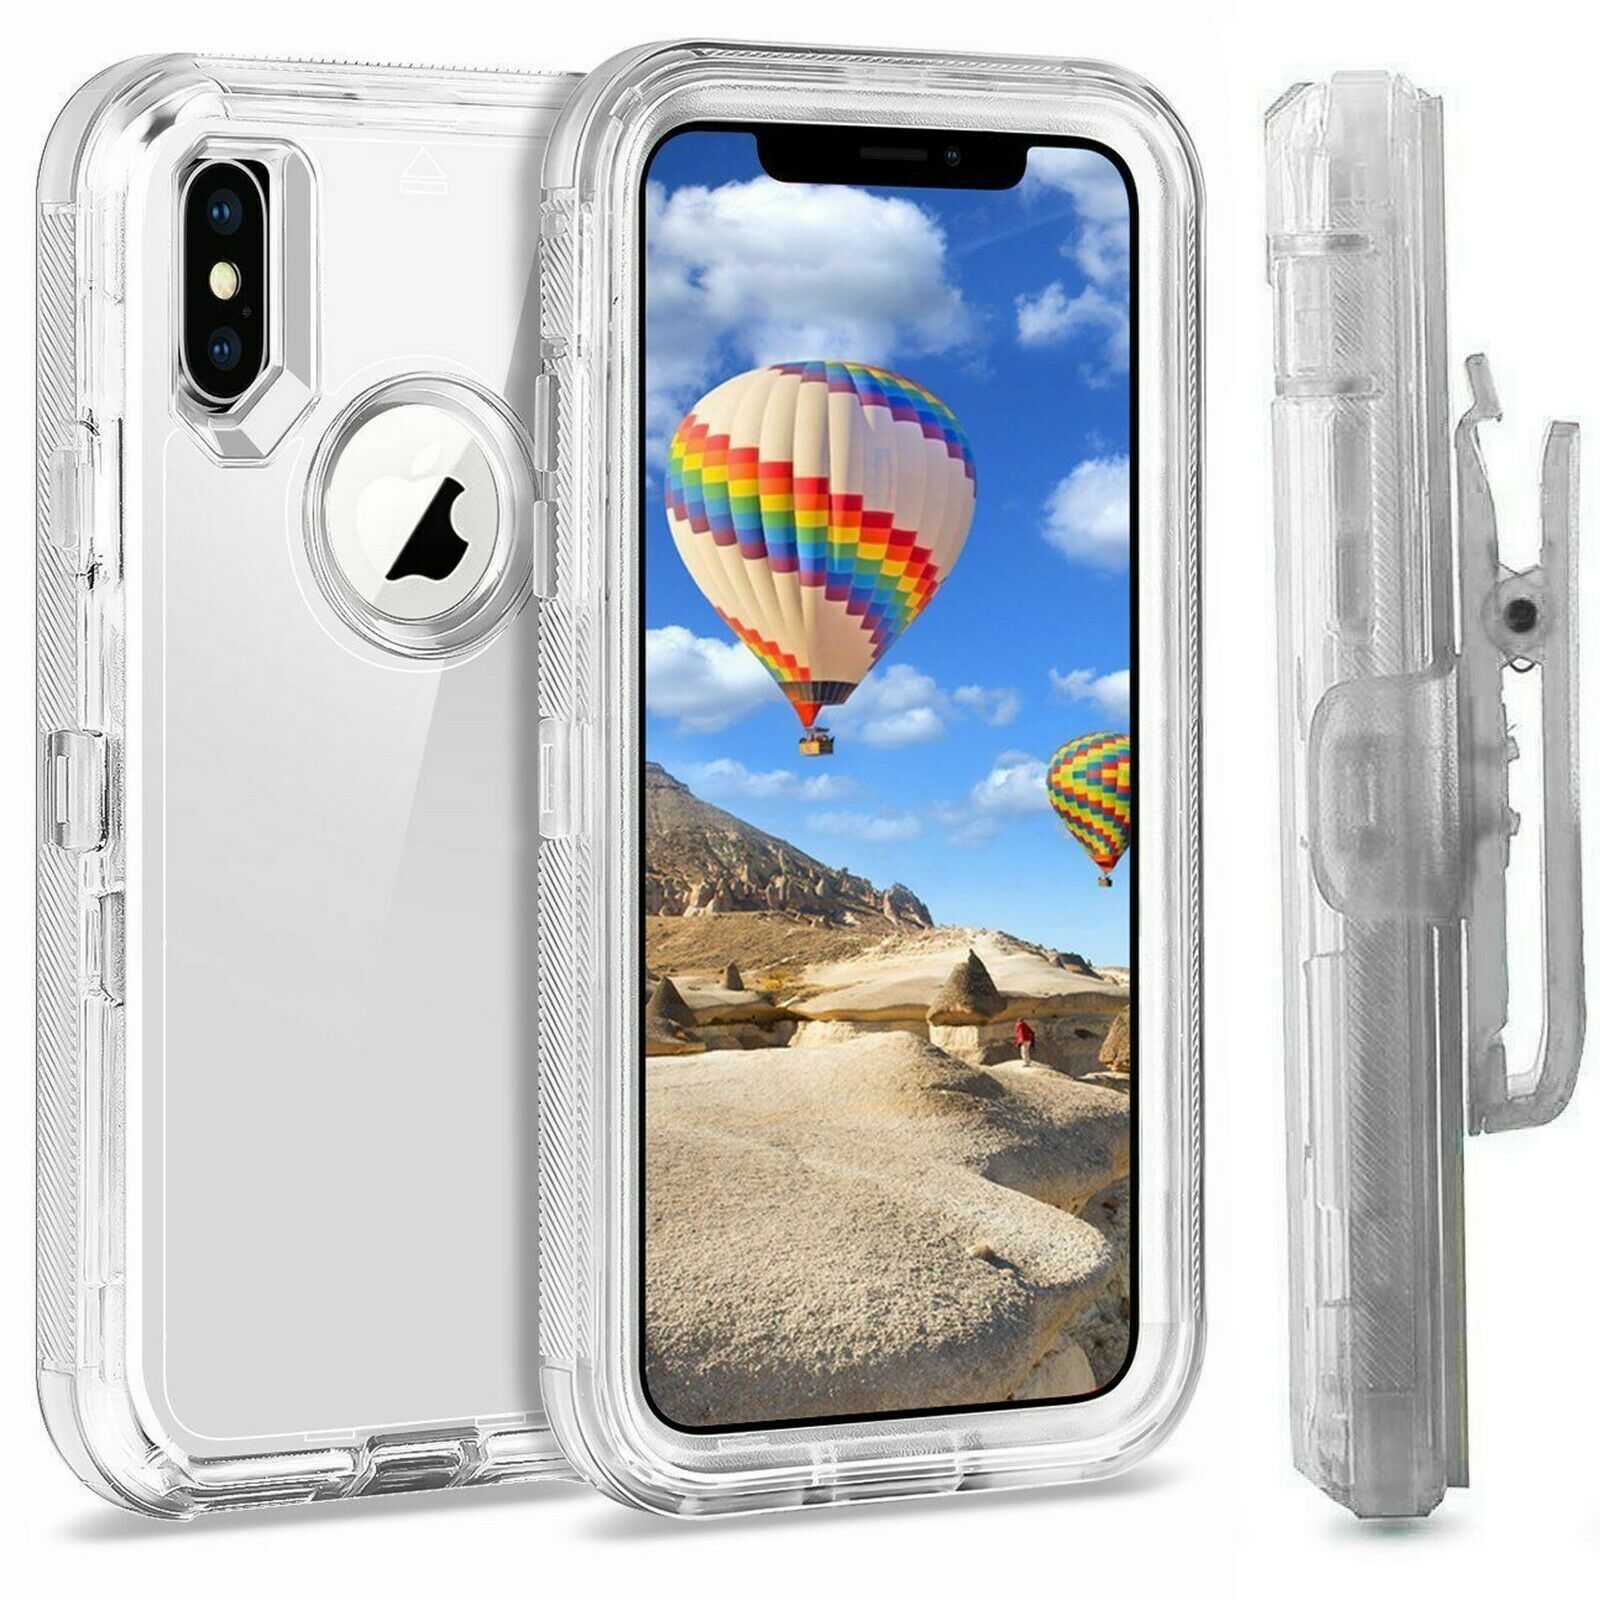 Premium Armor Heavy Duty Case with Clip for iPHONE XR 6.1 (Clear)